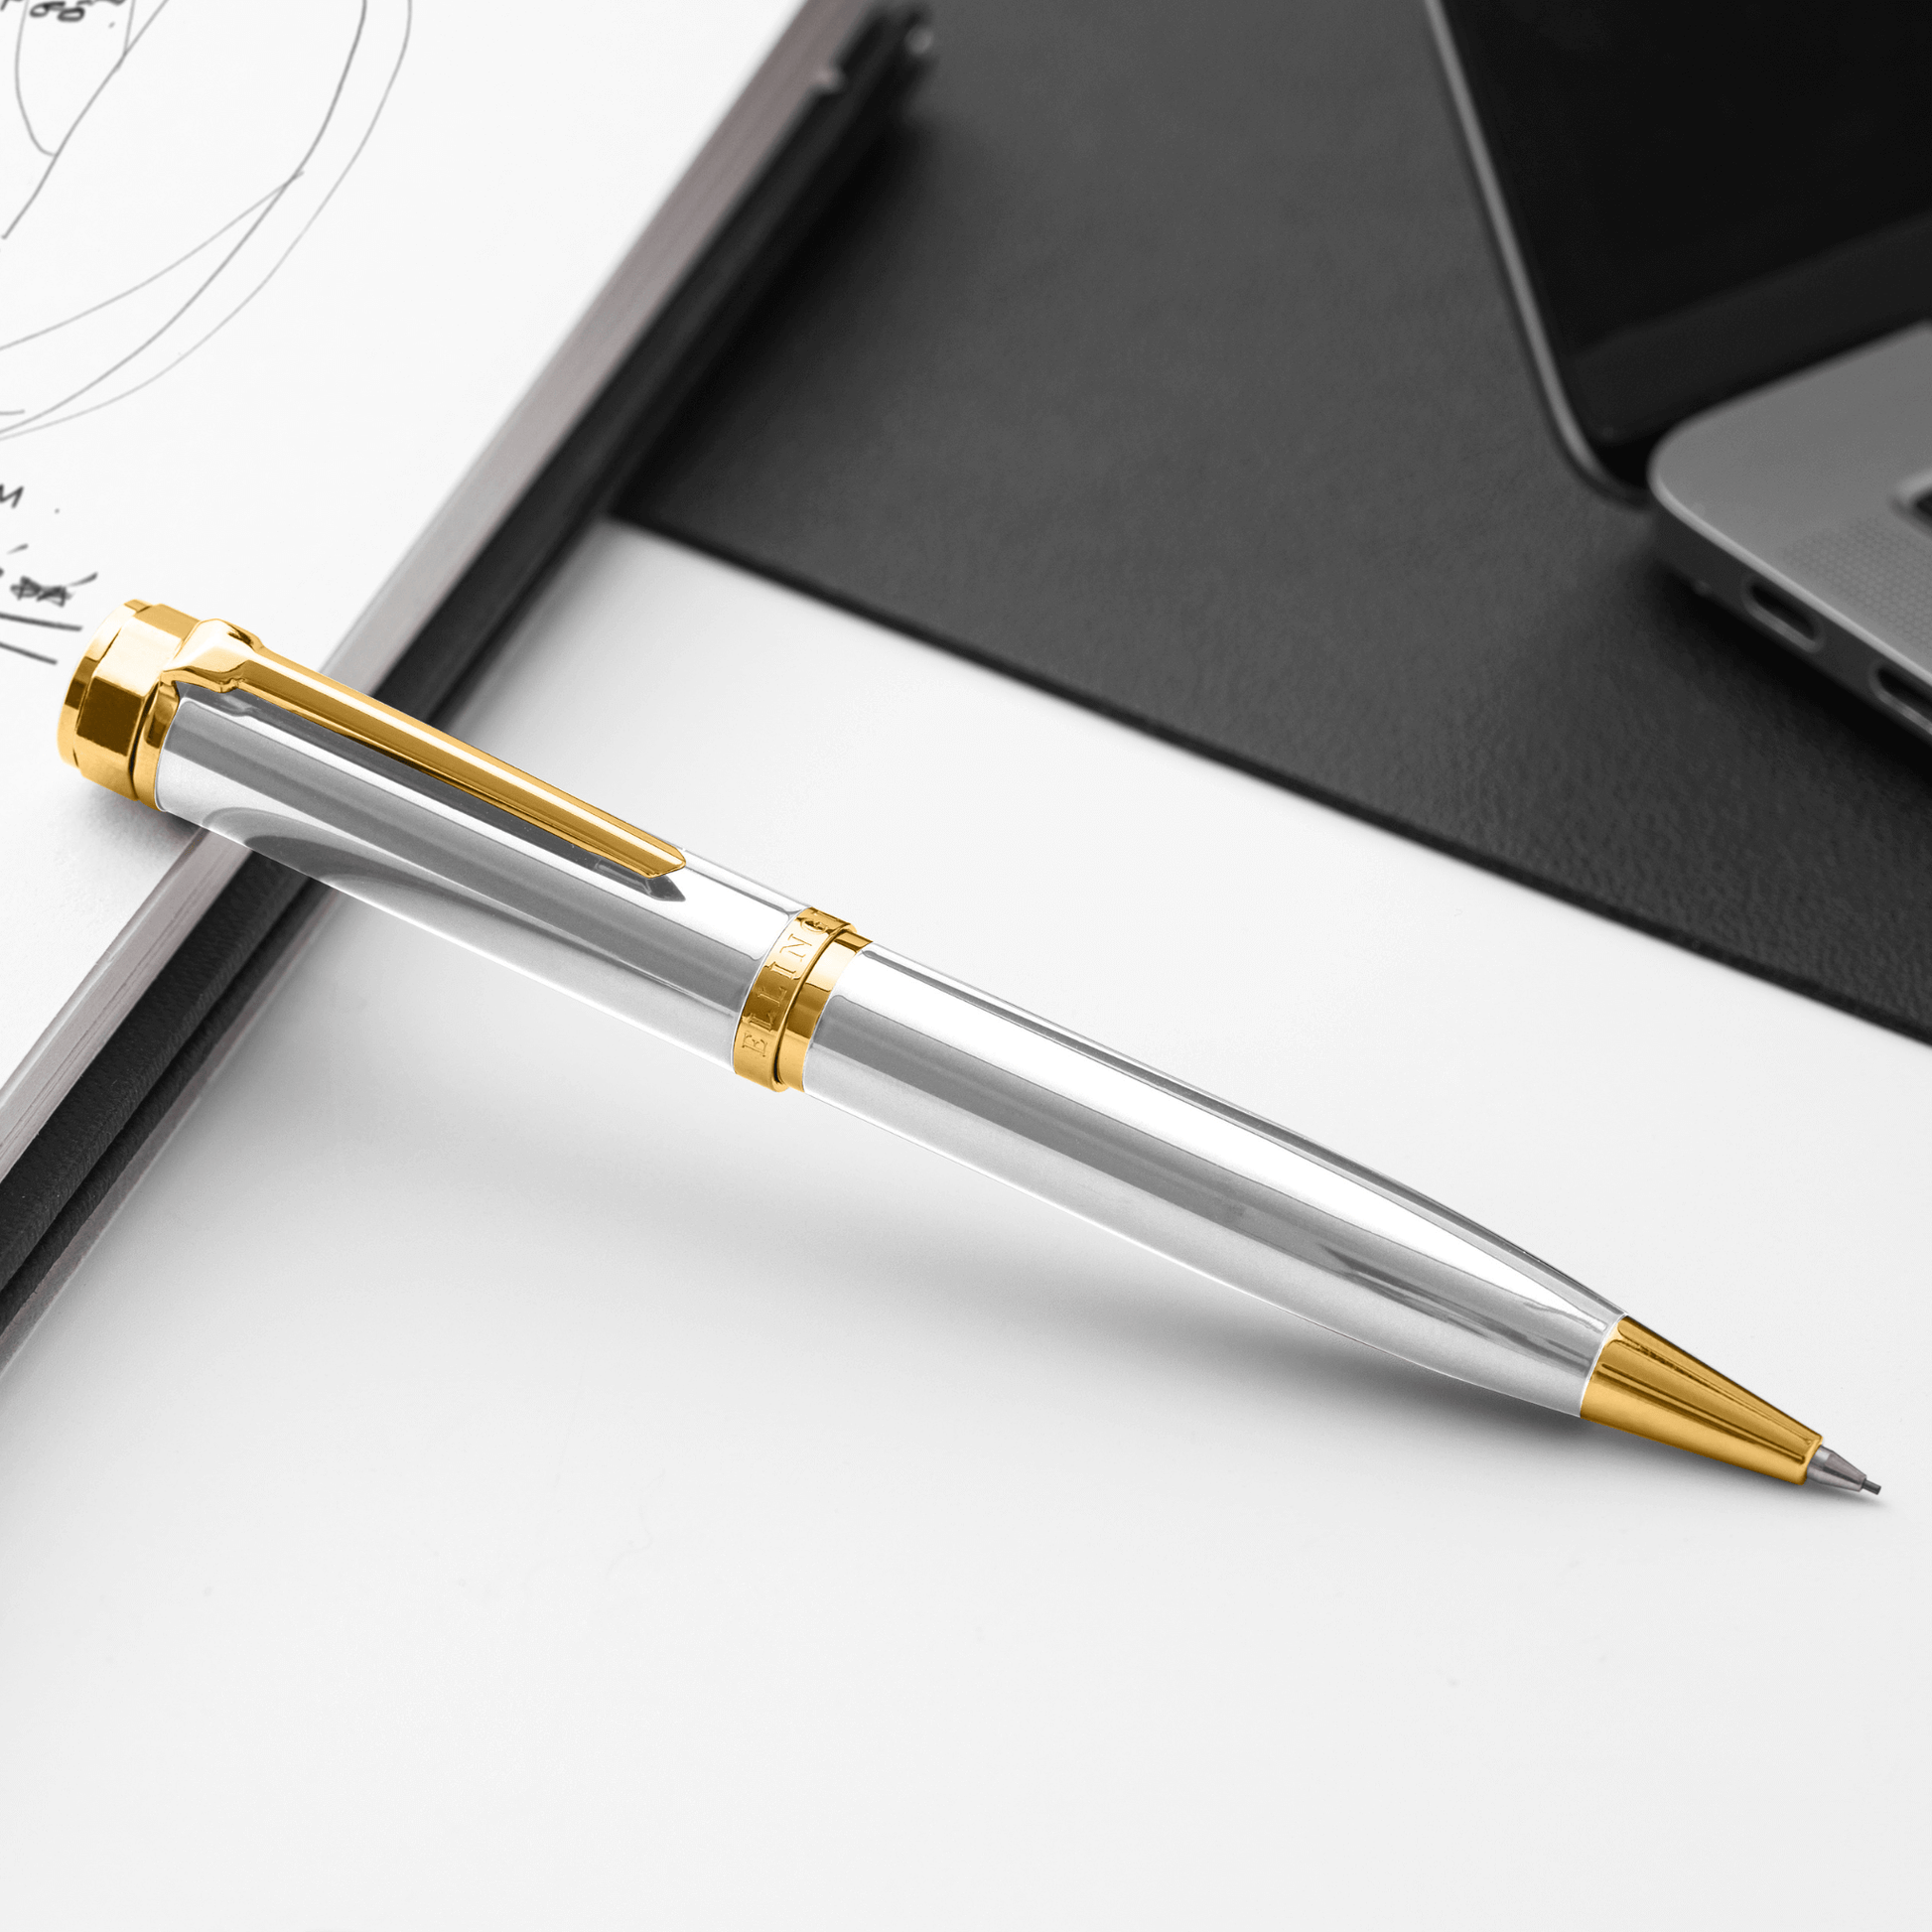 The Presidential Oath Mechanical Pencil